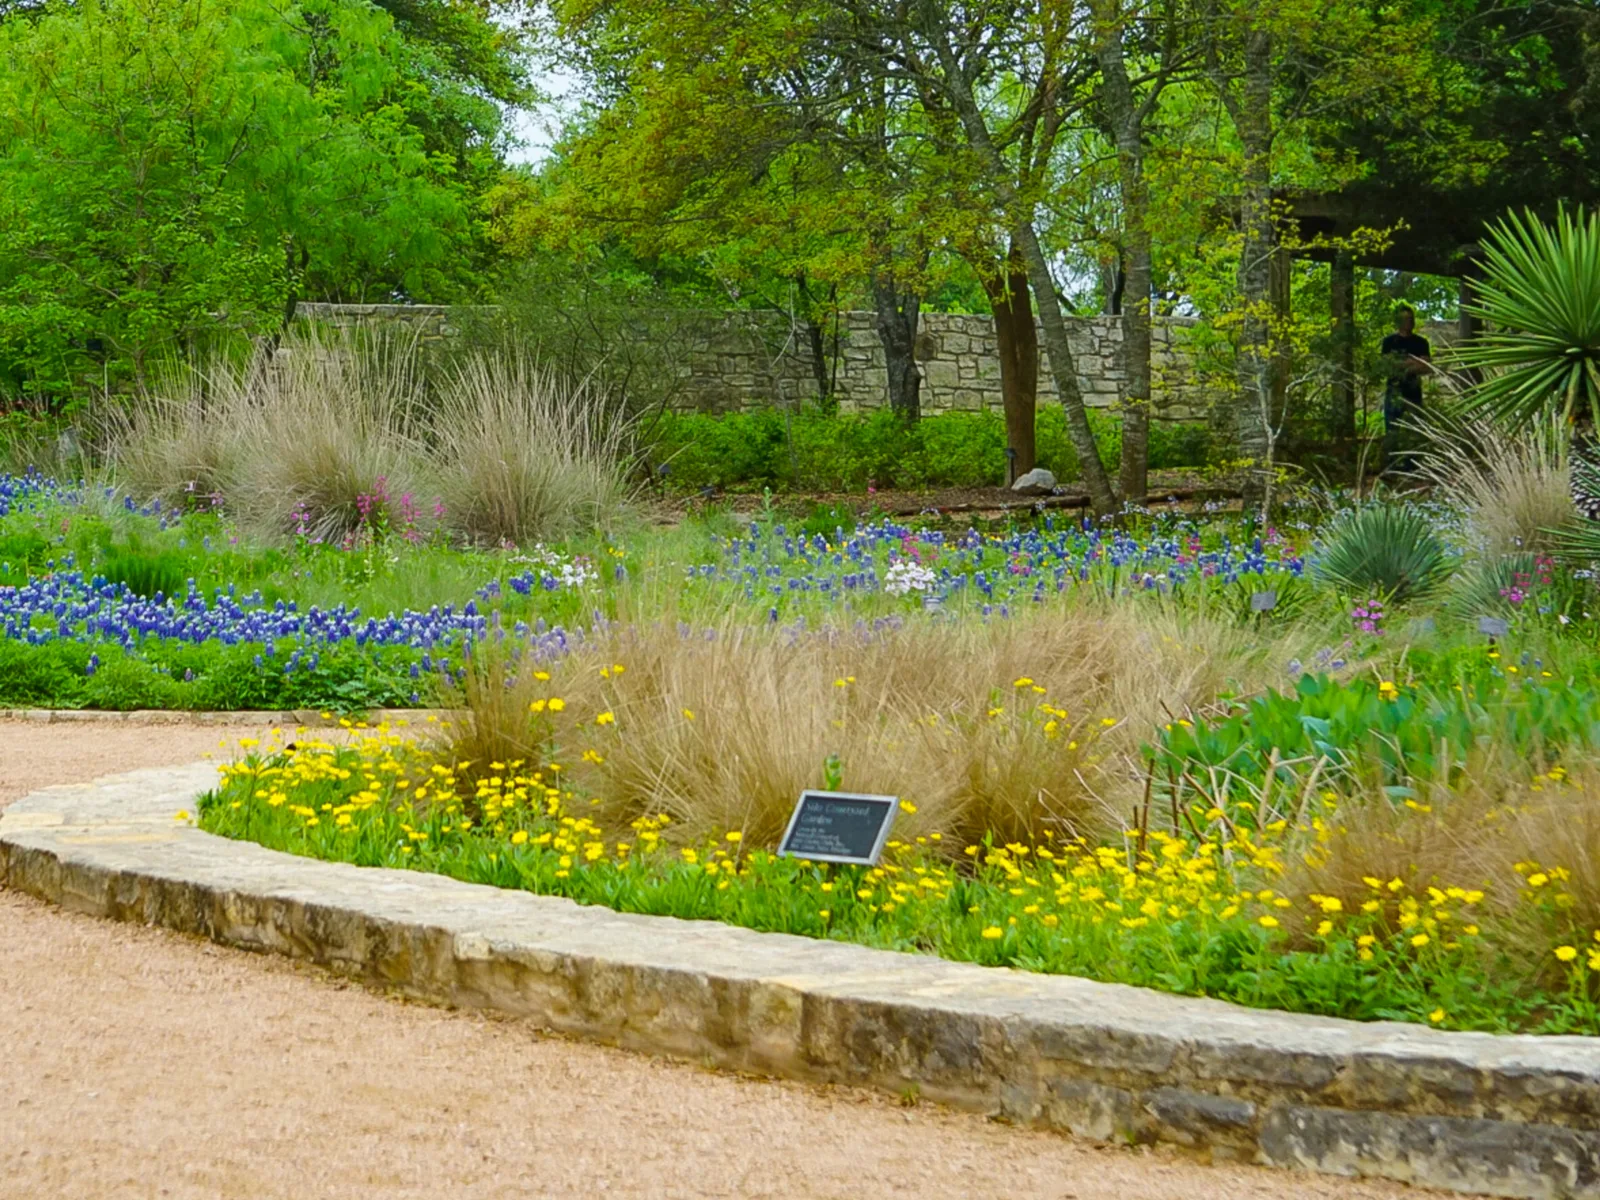 Lady Bird Johnson Wildflower Center, one of the best things to do in Austin